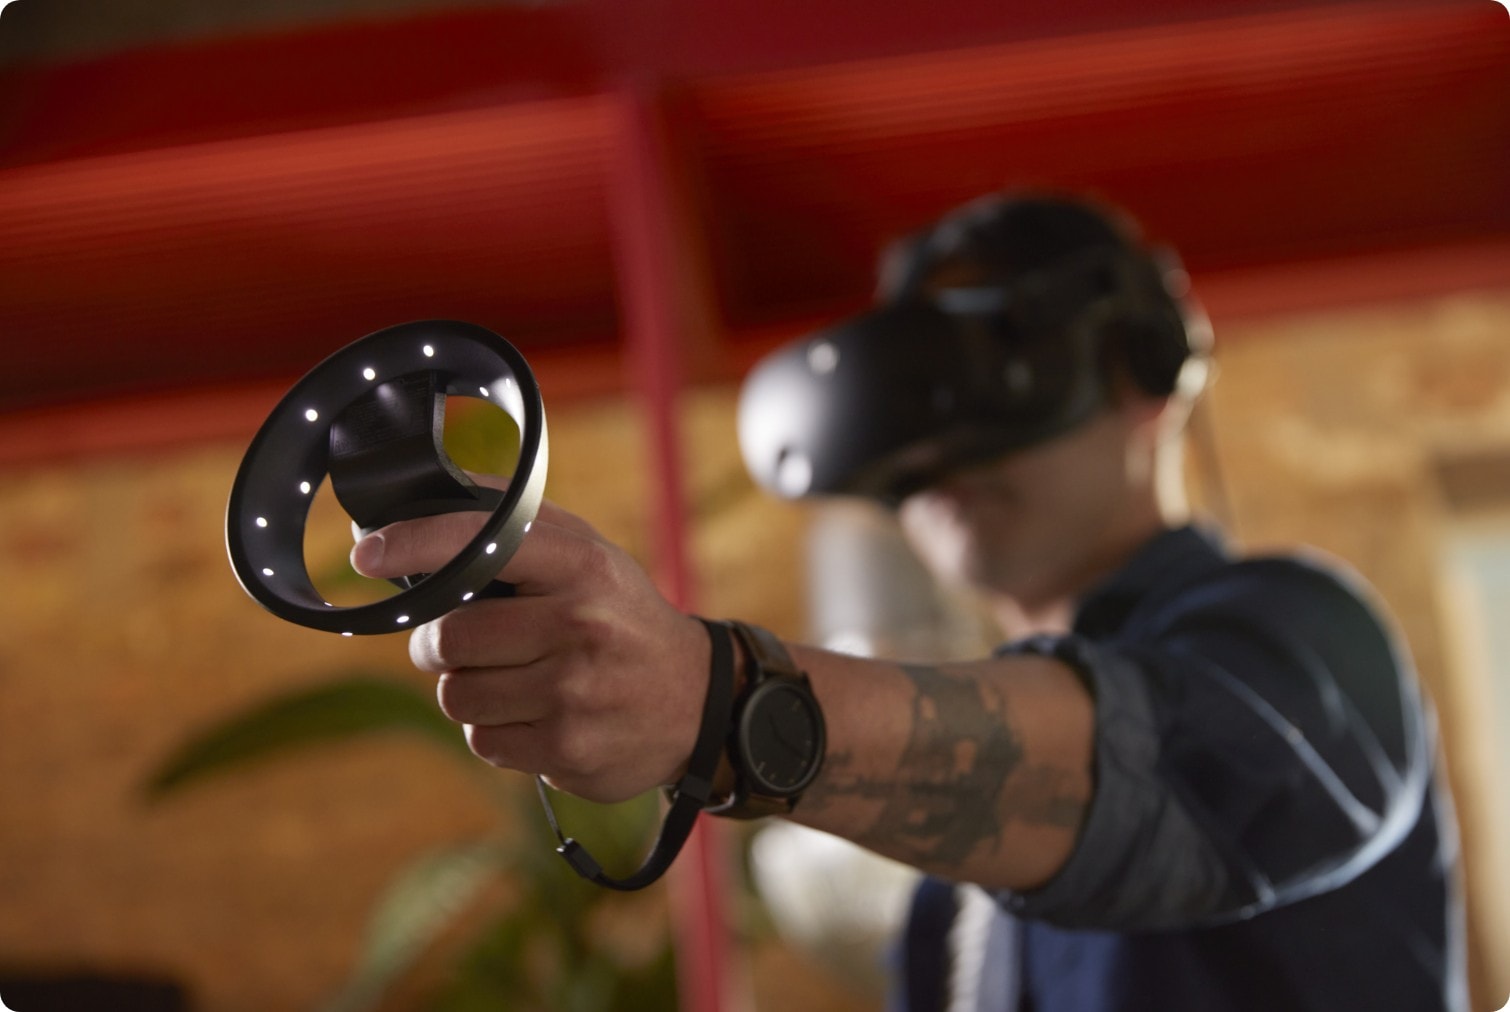 HP Reverb G2 VR Headset | HP® Official Site